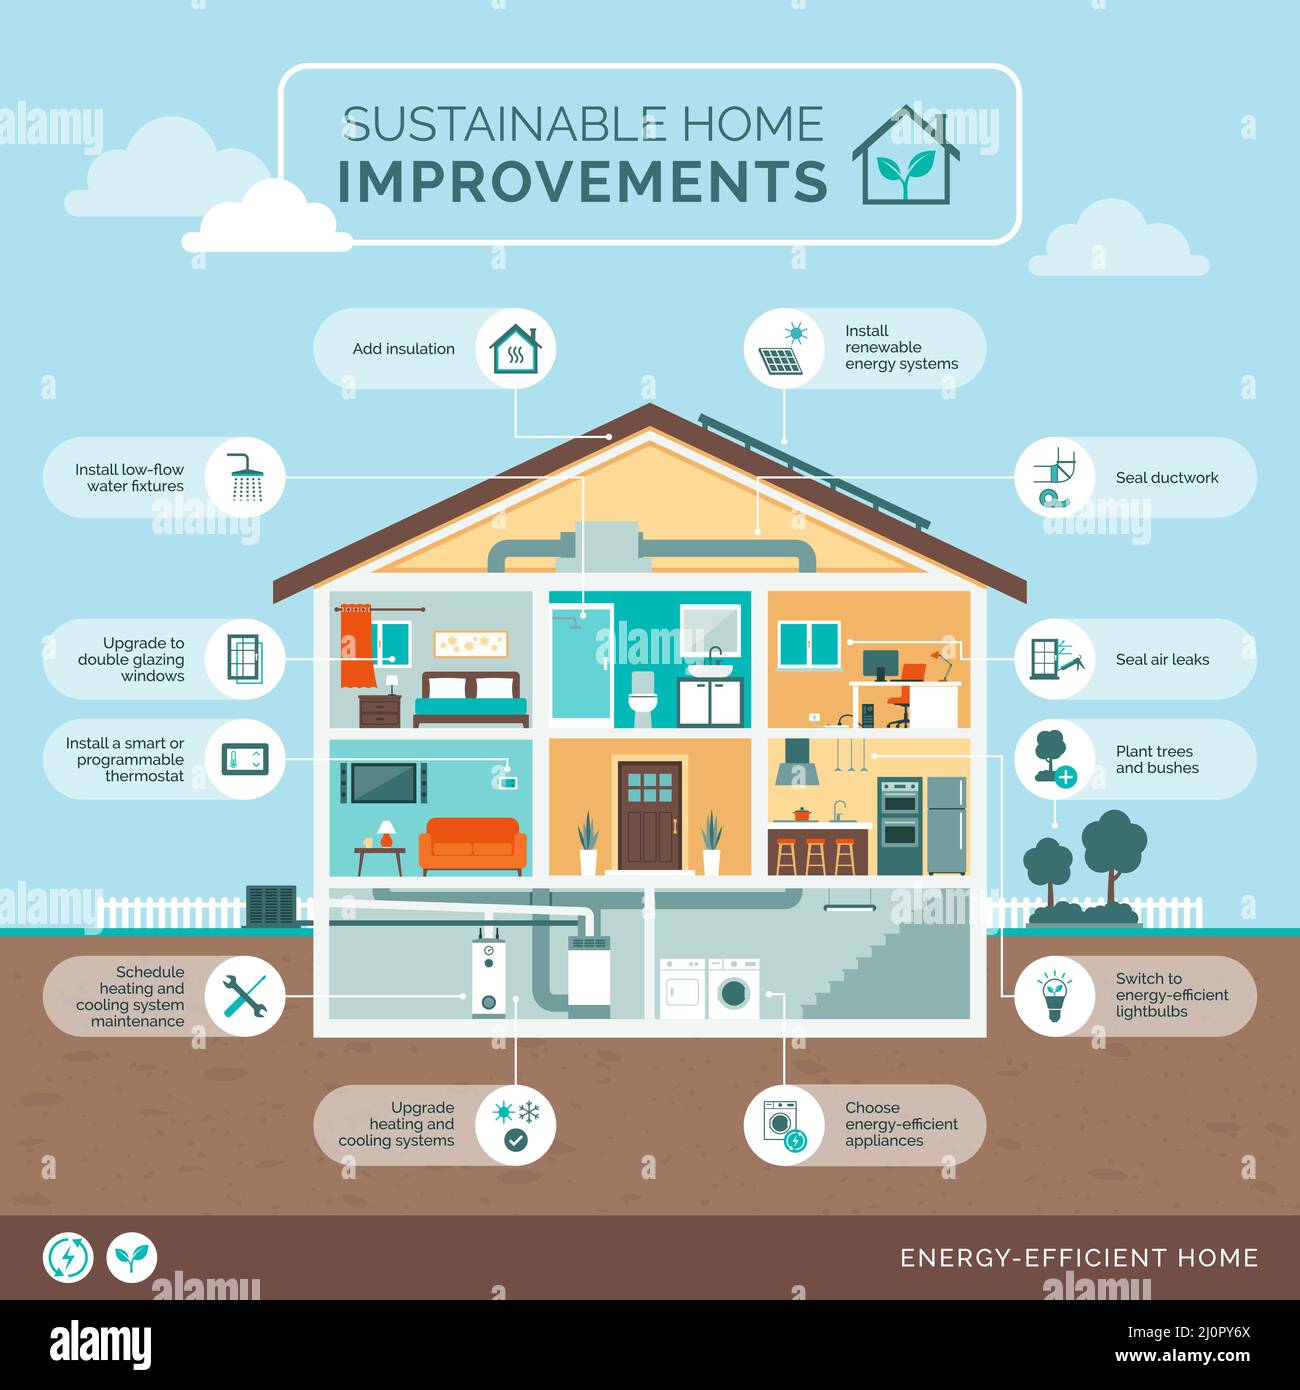 Sustainable home improvements: eco-friendly upgrades for your home, house section infographic with icons Stock Vector